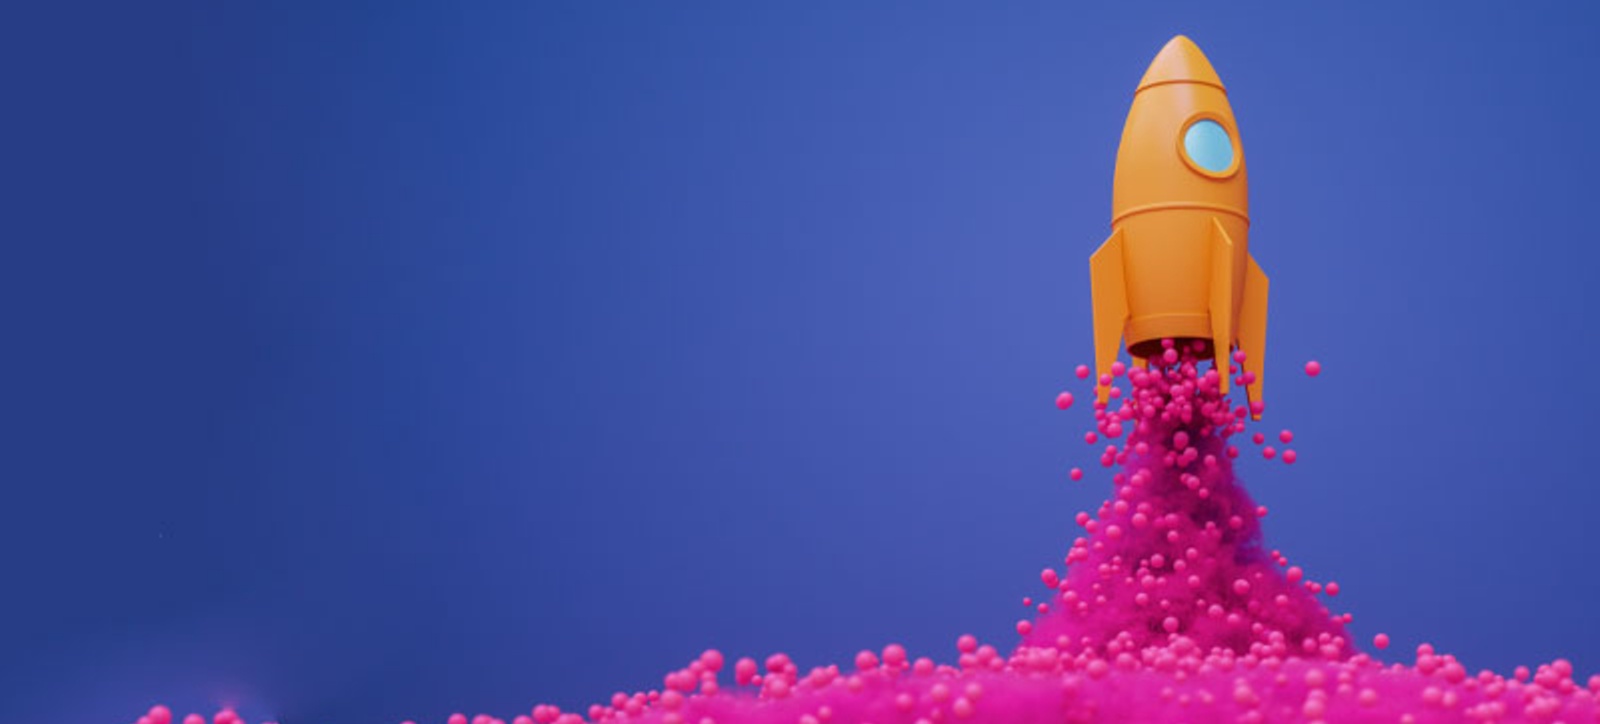 A digital image of an orange rocket taking off amid a cloud of pink bubbles as an illustrating of digital innovation.